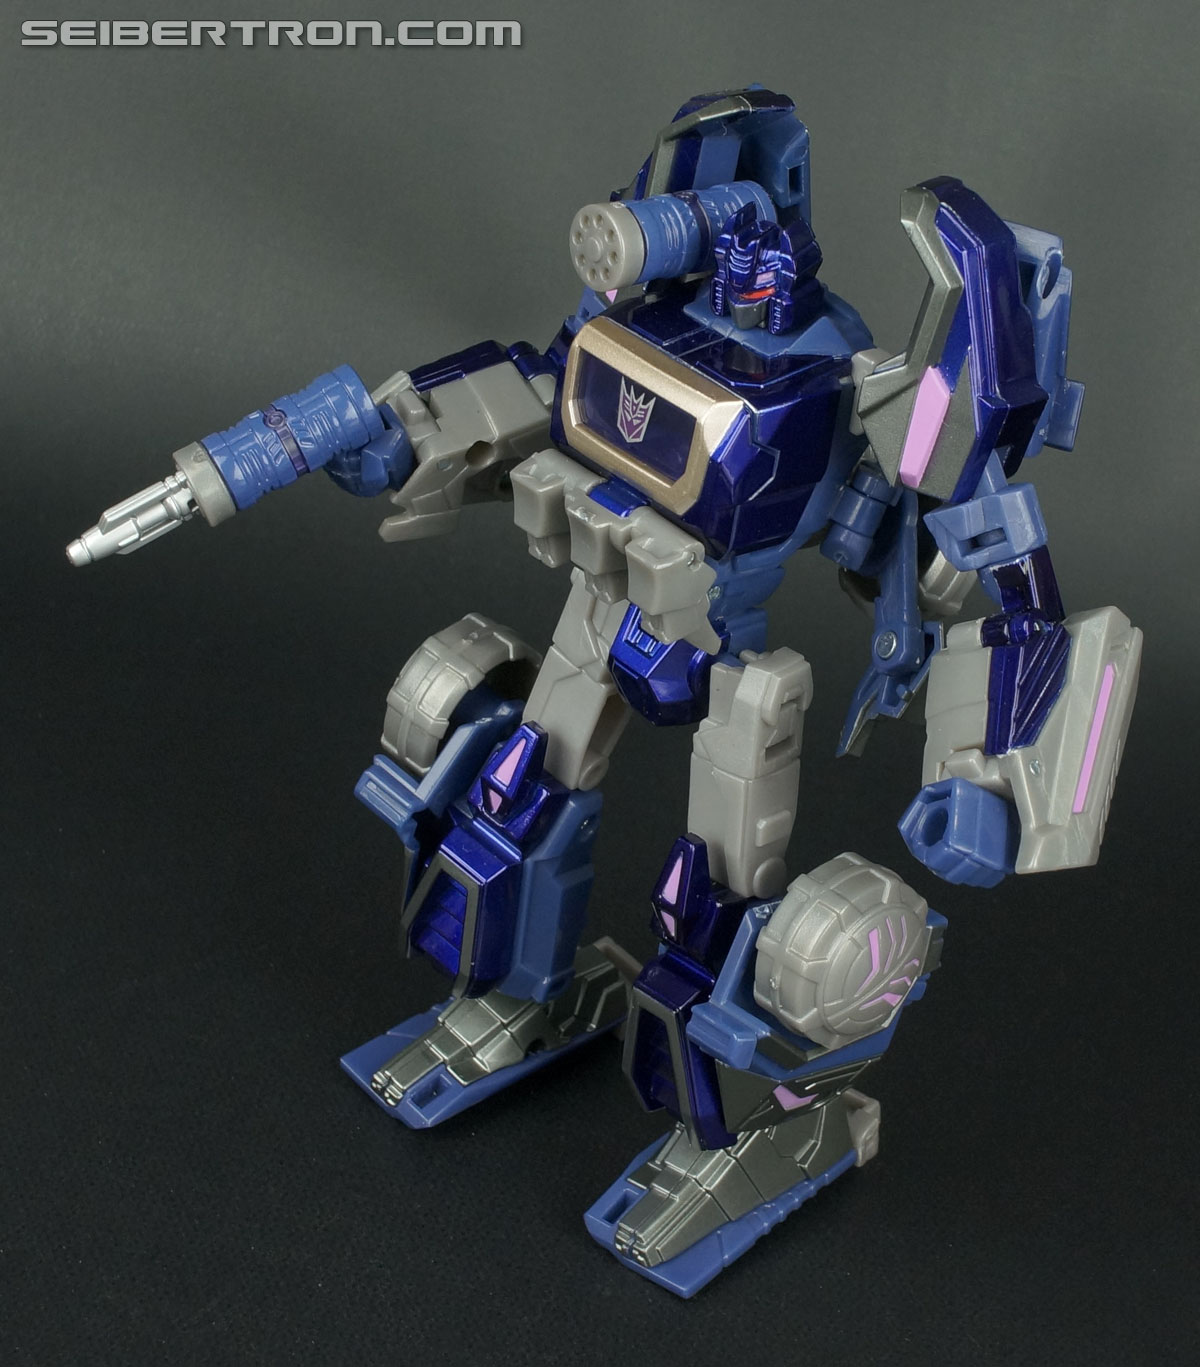 Transformers United Soundwave Cybertron Mode (Image #69 of 103)